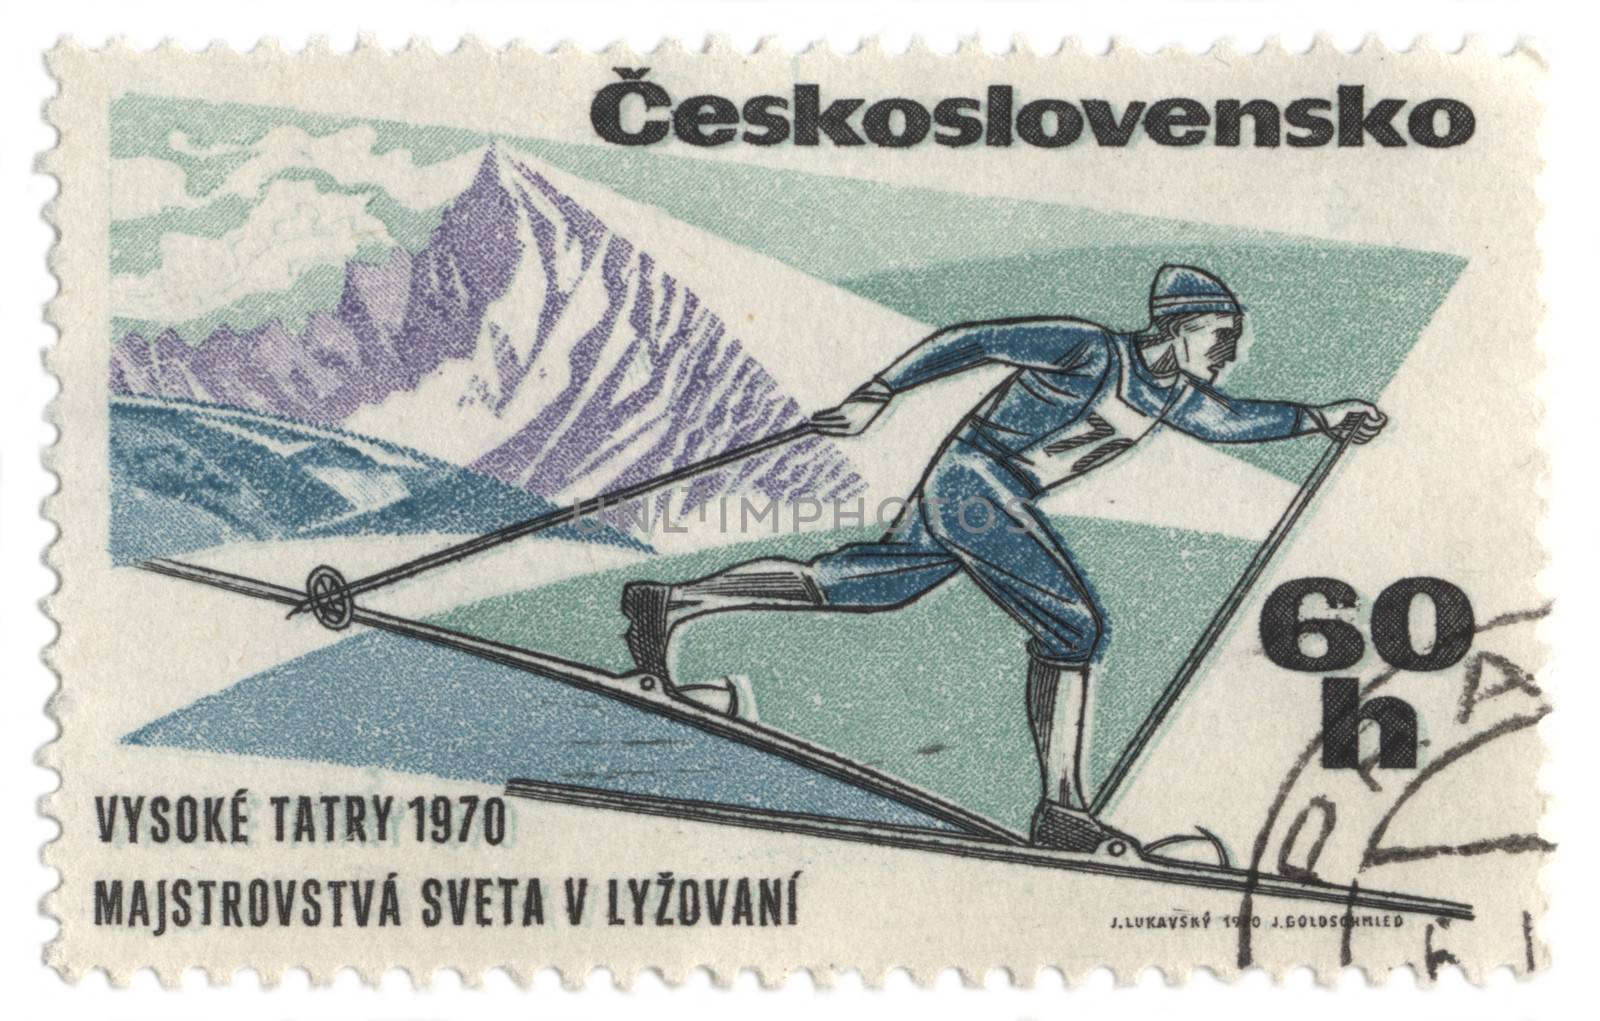 Skier on post stamp by wander